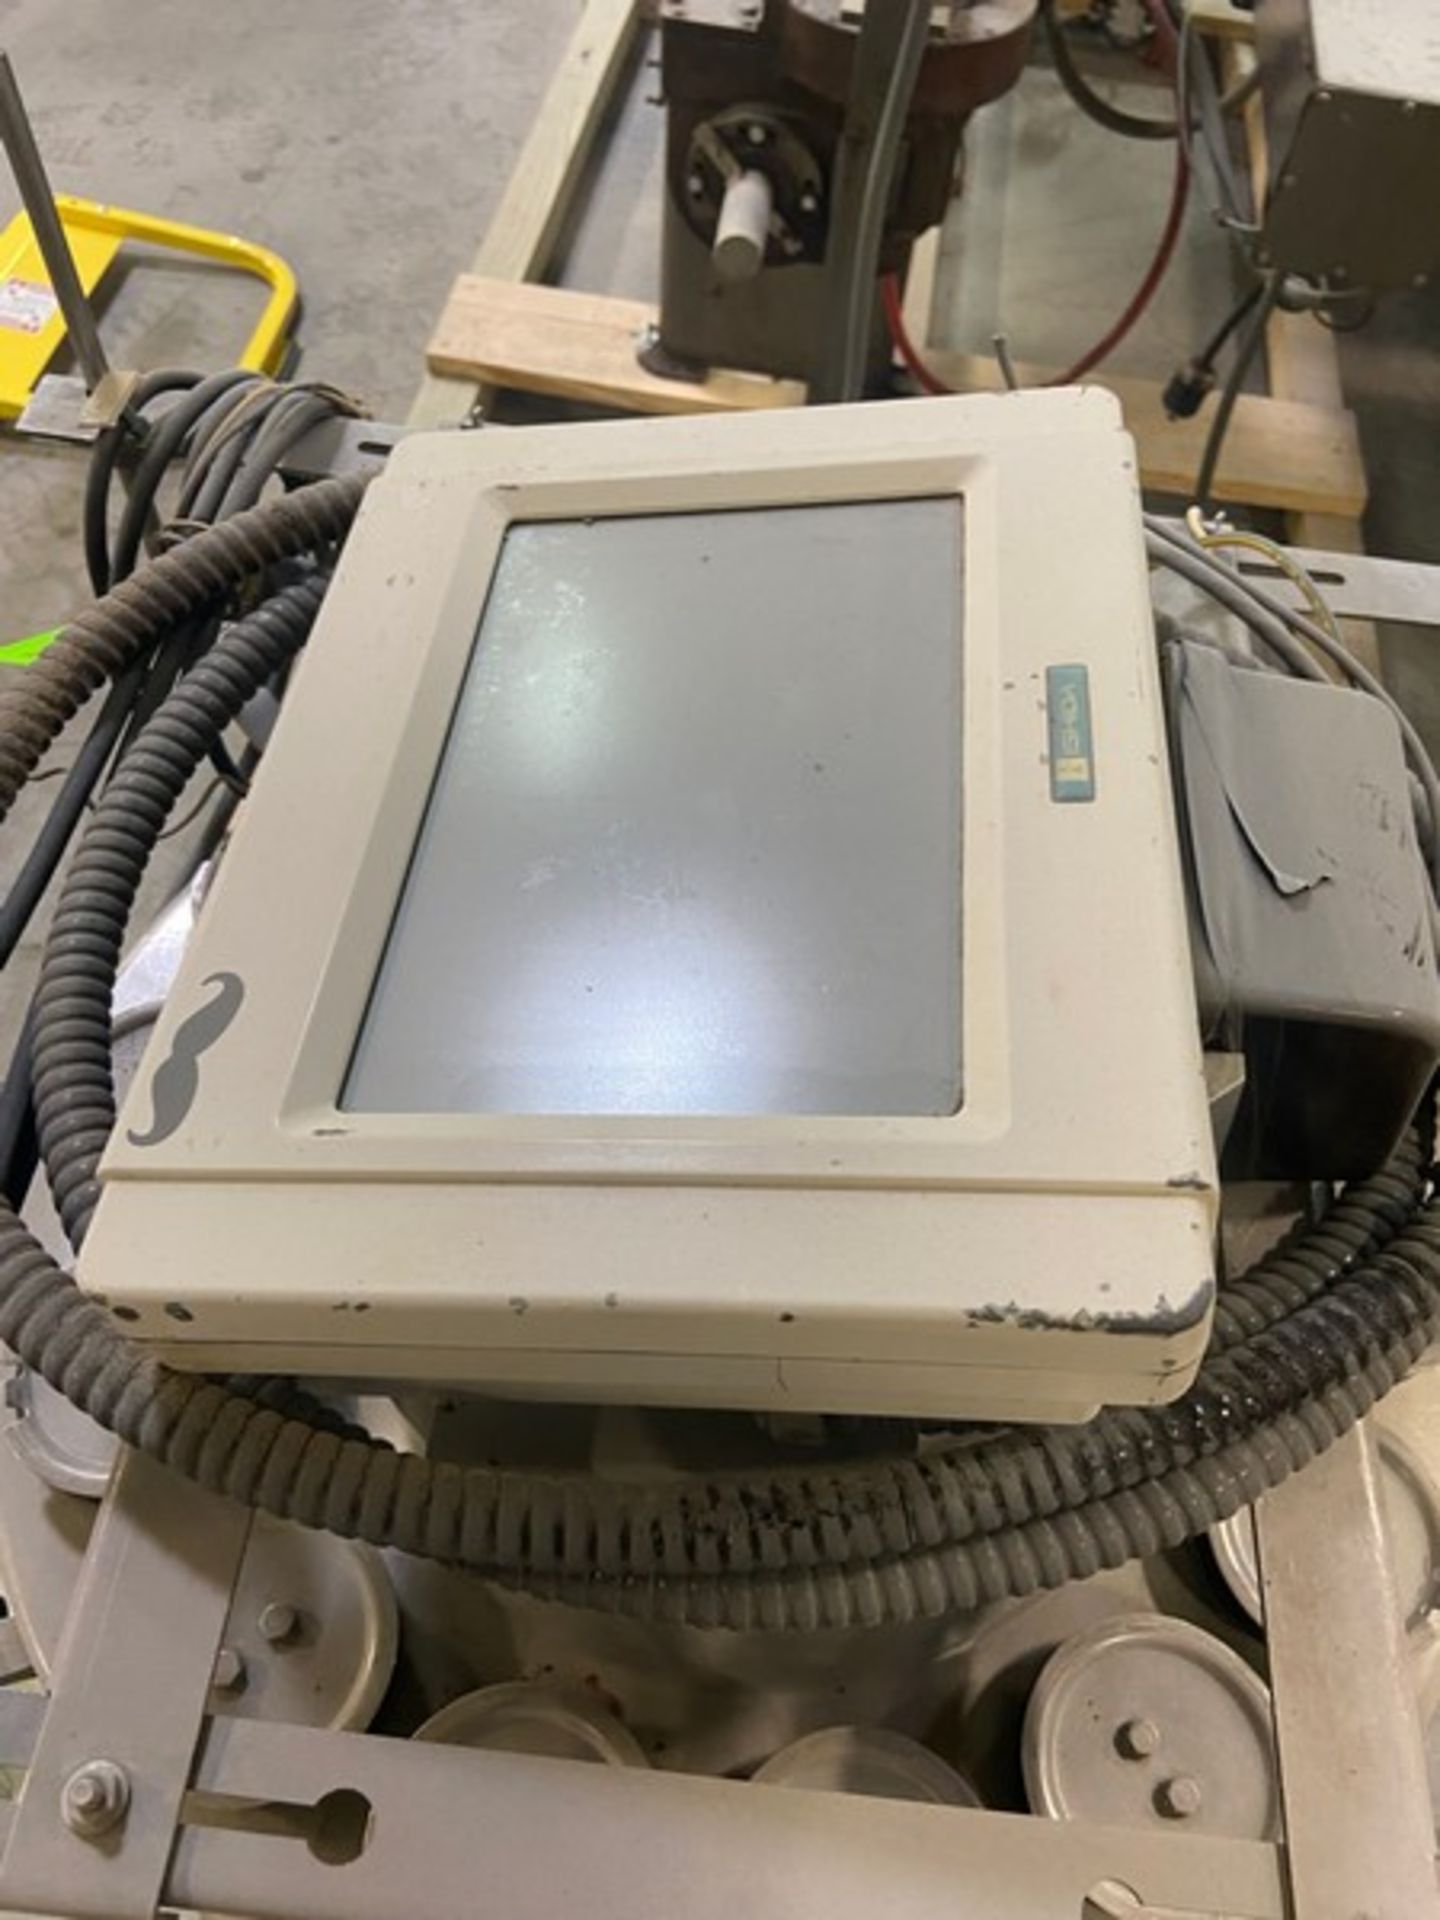 Ishida 14-Station Filler Scale, M/N CCW-RZ-214W-S/15-PB, 208 Volts, 1 Phase, with Ishida Controller, - Image 4 of 13